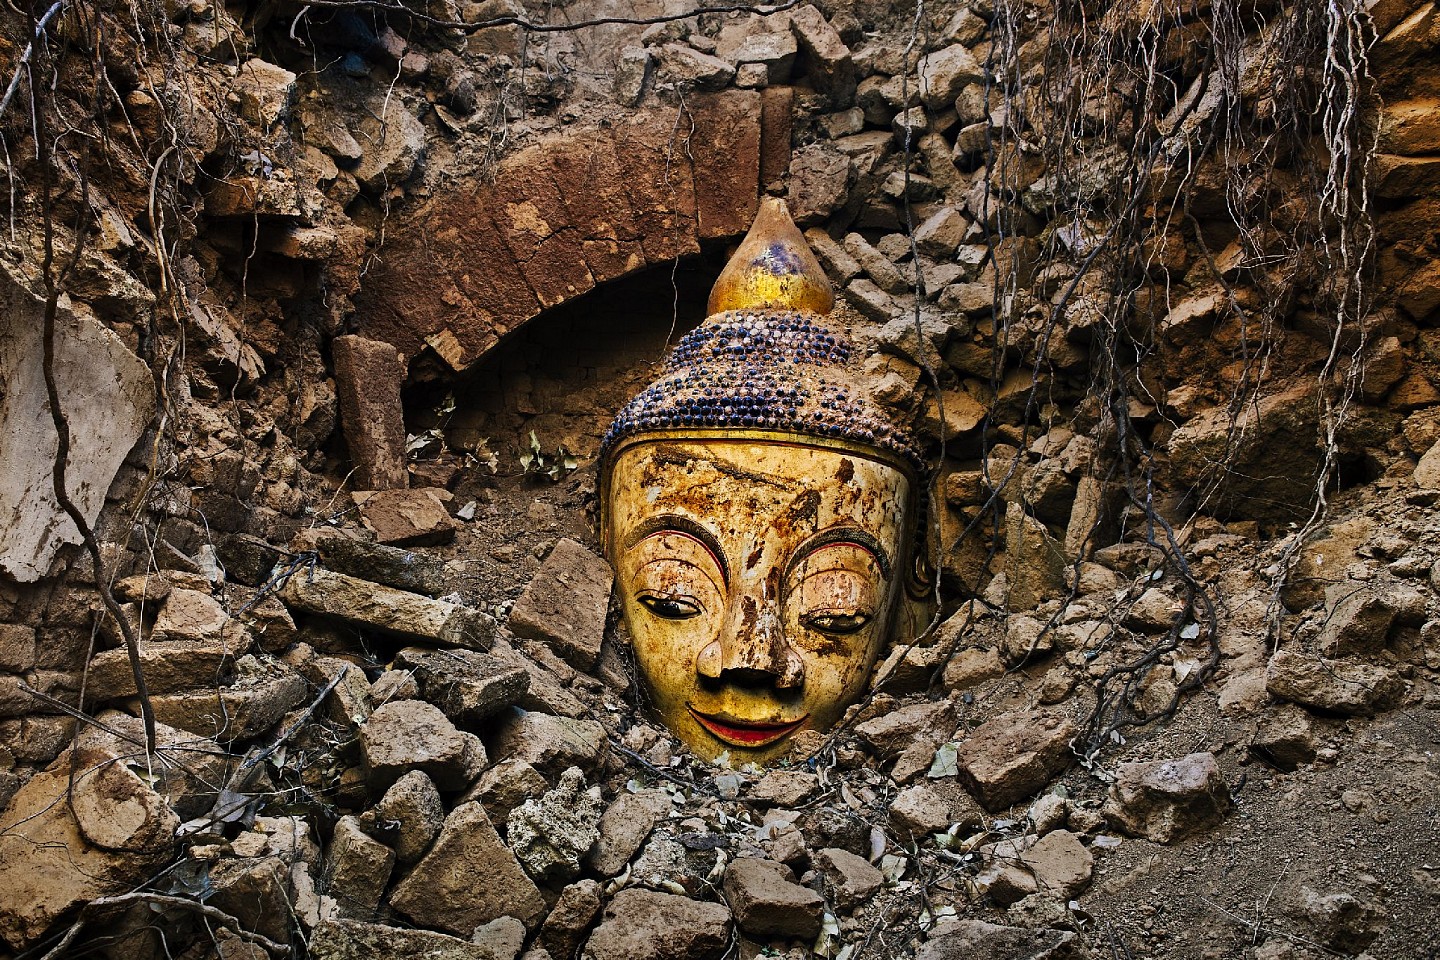 Steve McCurry, Buddha Head in Rubble, 2011
FujiFlex Crystal Archive Print
Price/Size on request